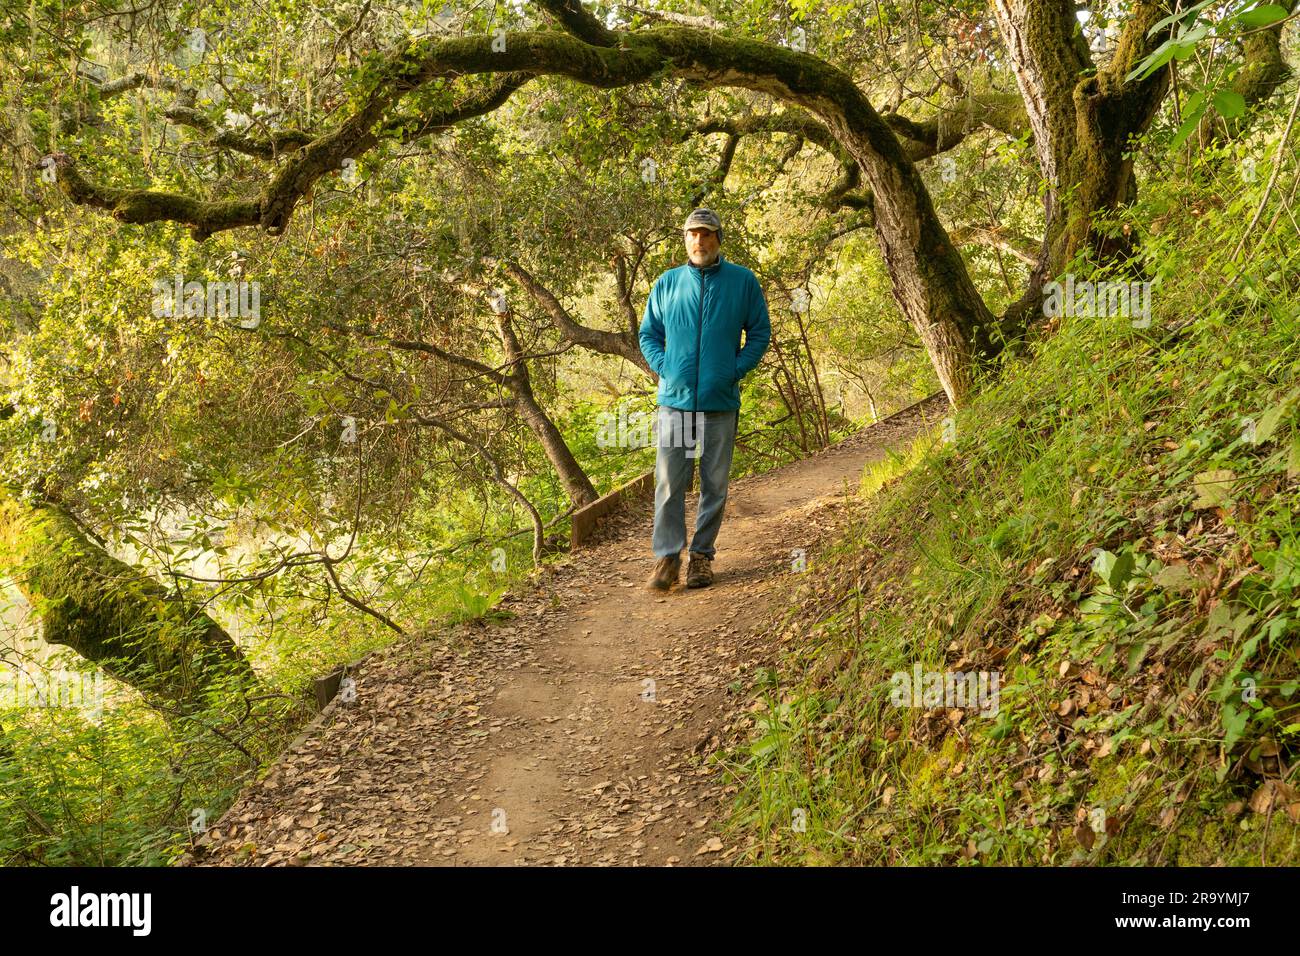 Man walking towards the viewer on a trail through woods of enchanted oak trees with curved bough and green shrub, wearing jacket, jeans and a cap Stock Photo